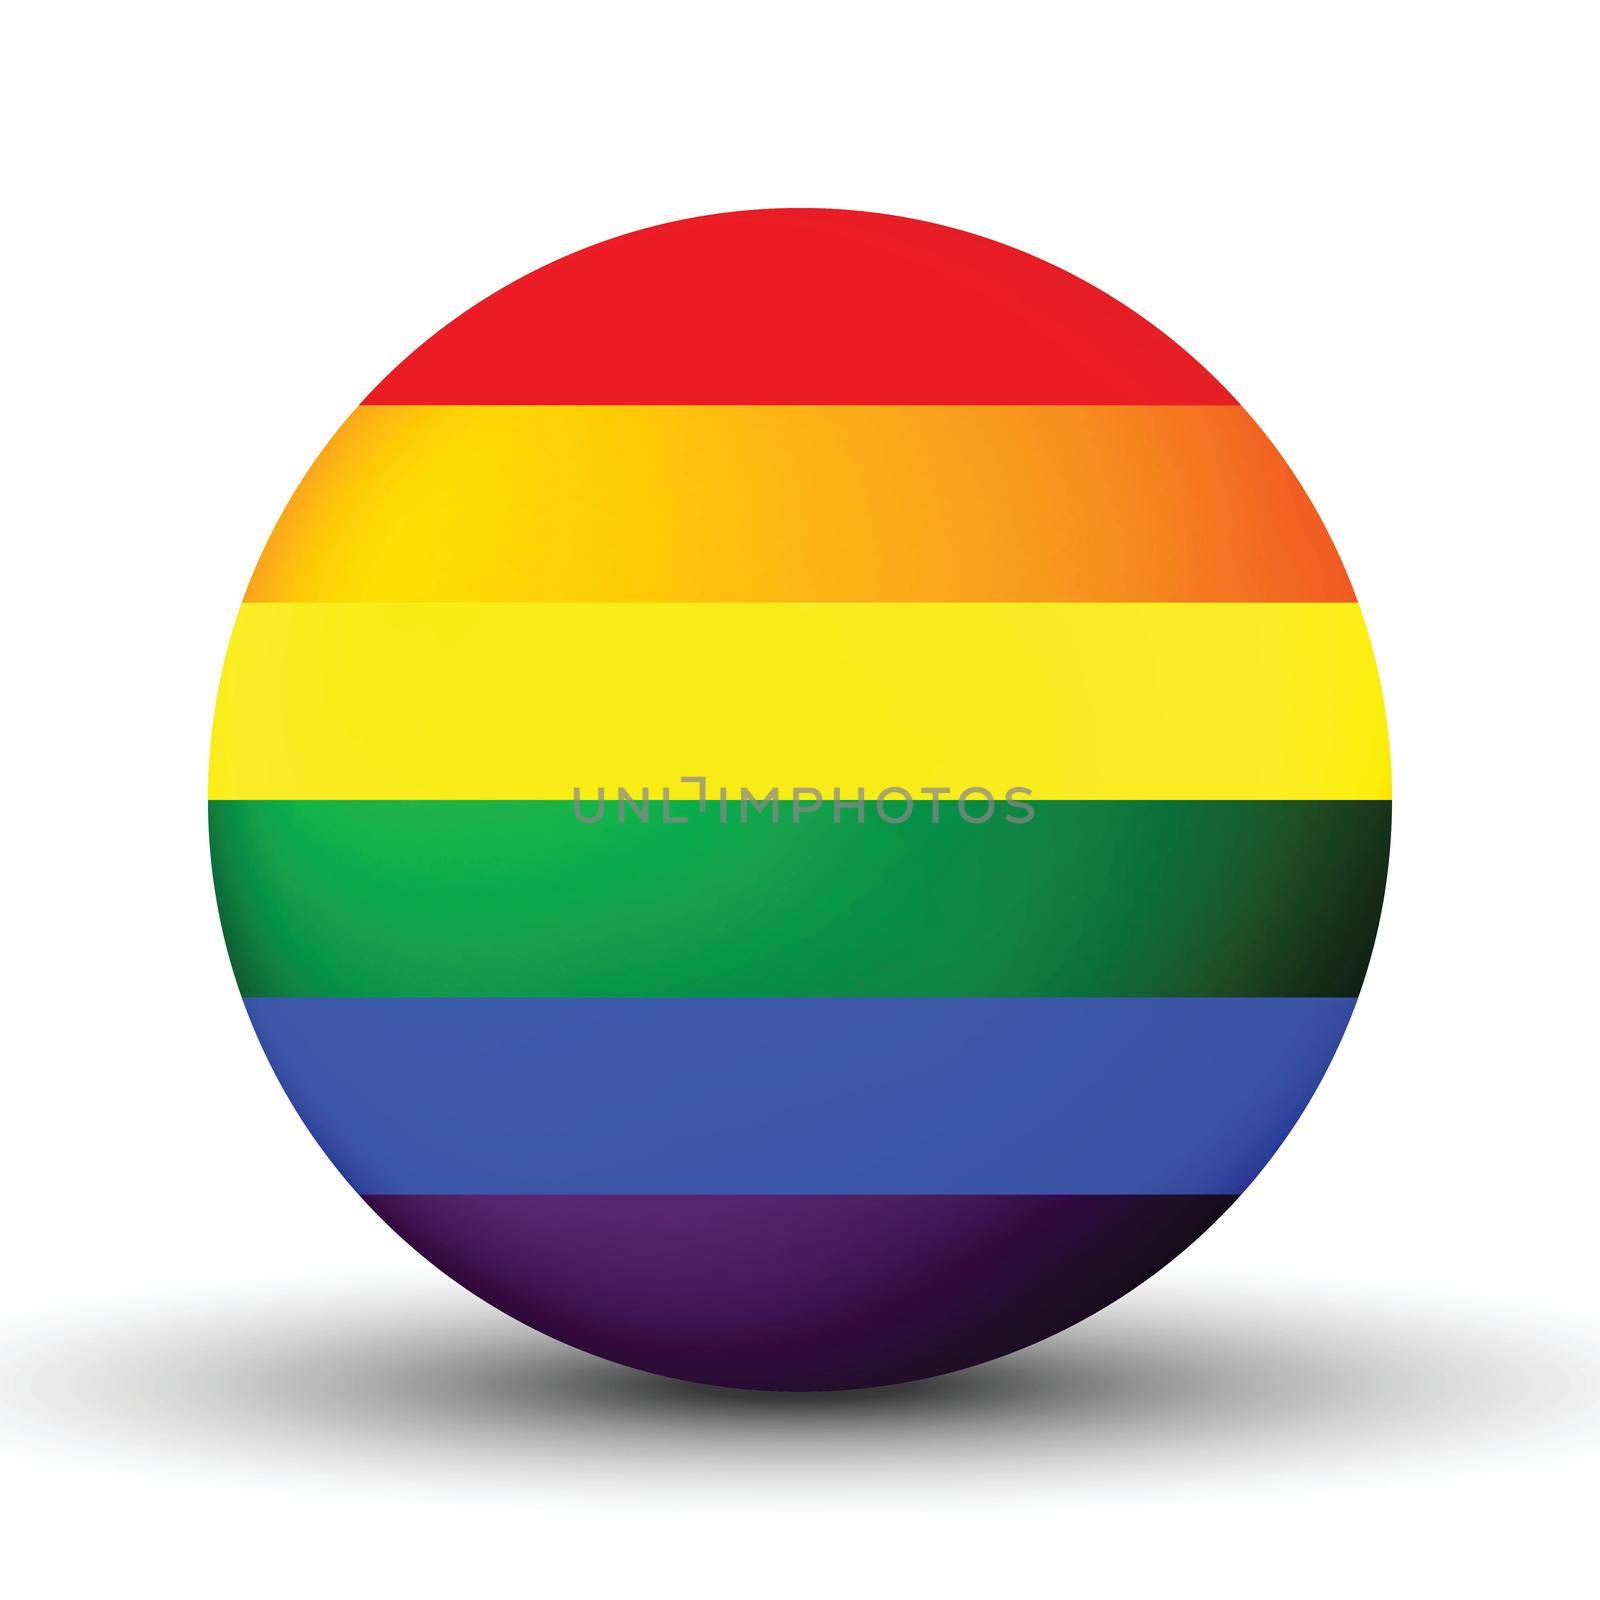 Glass light ball with flag of LGBT. Round sphere, template icon. Glossy realistic ball, 3D abstract vector illustration.Love wins. LGBT symbol sticker in rainbow colors. Gay pride collection by allaku